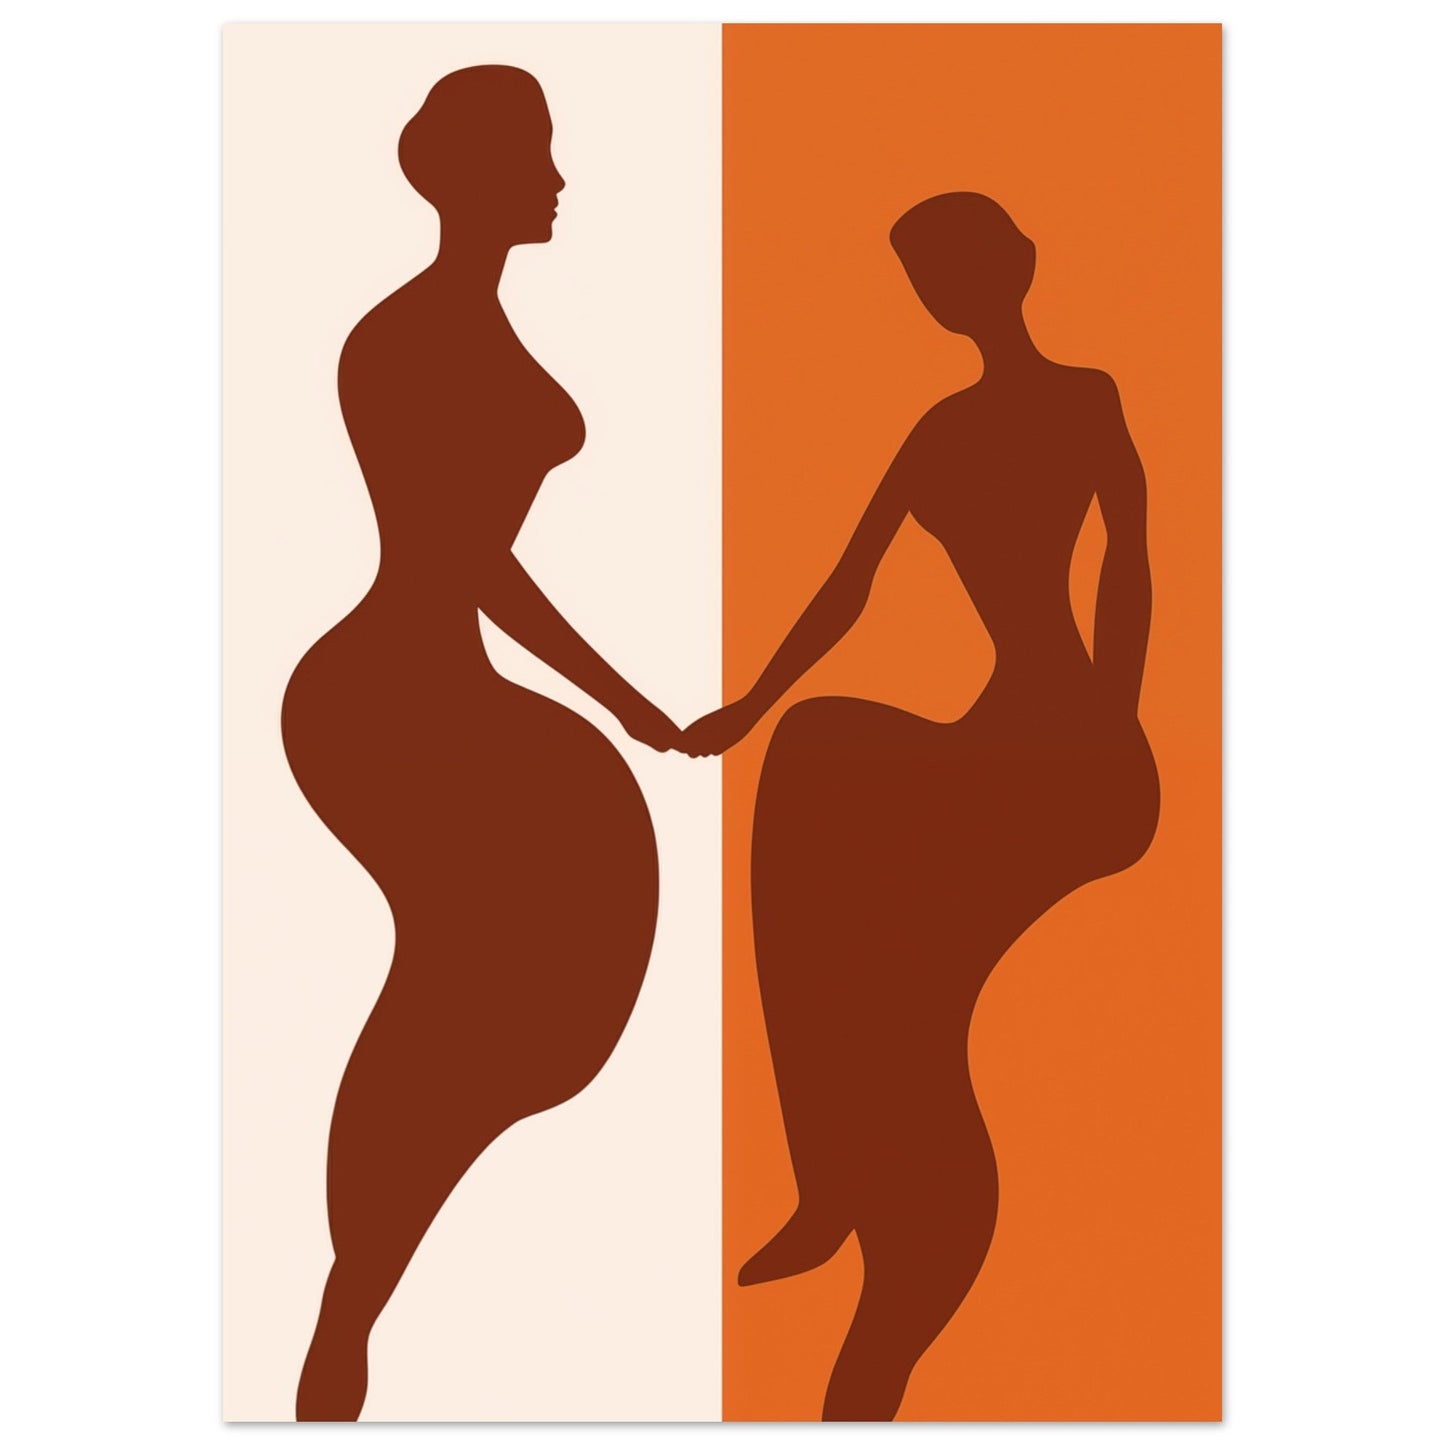 Two silhouettes of women holding hands on a Female Unity background.